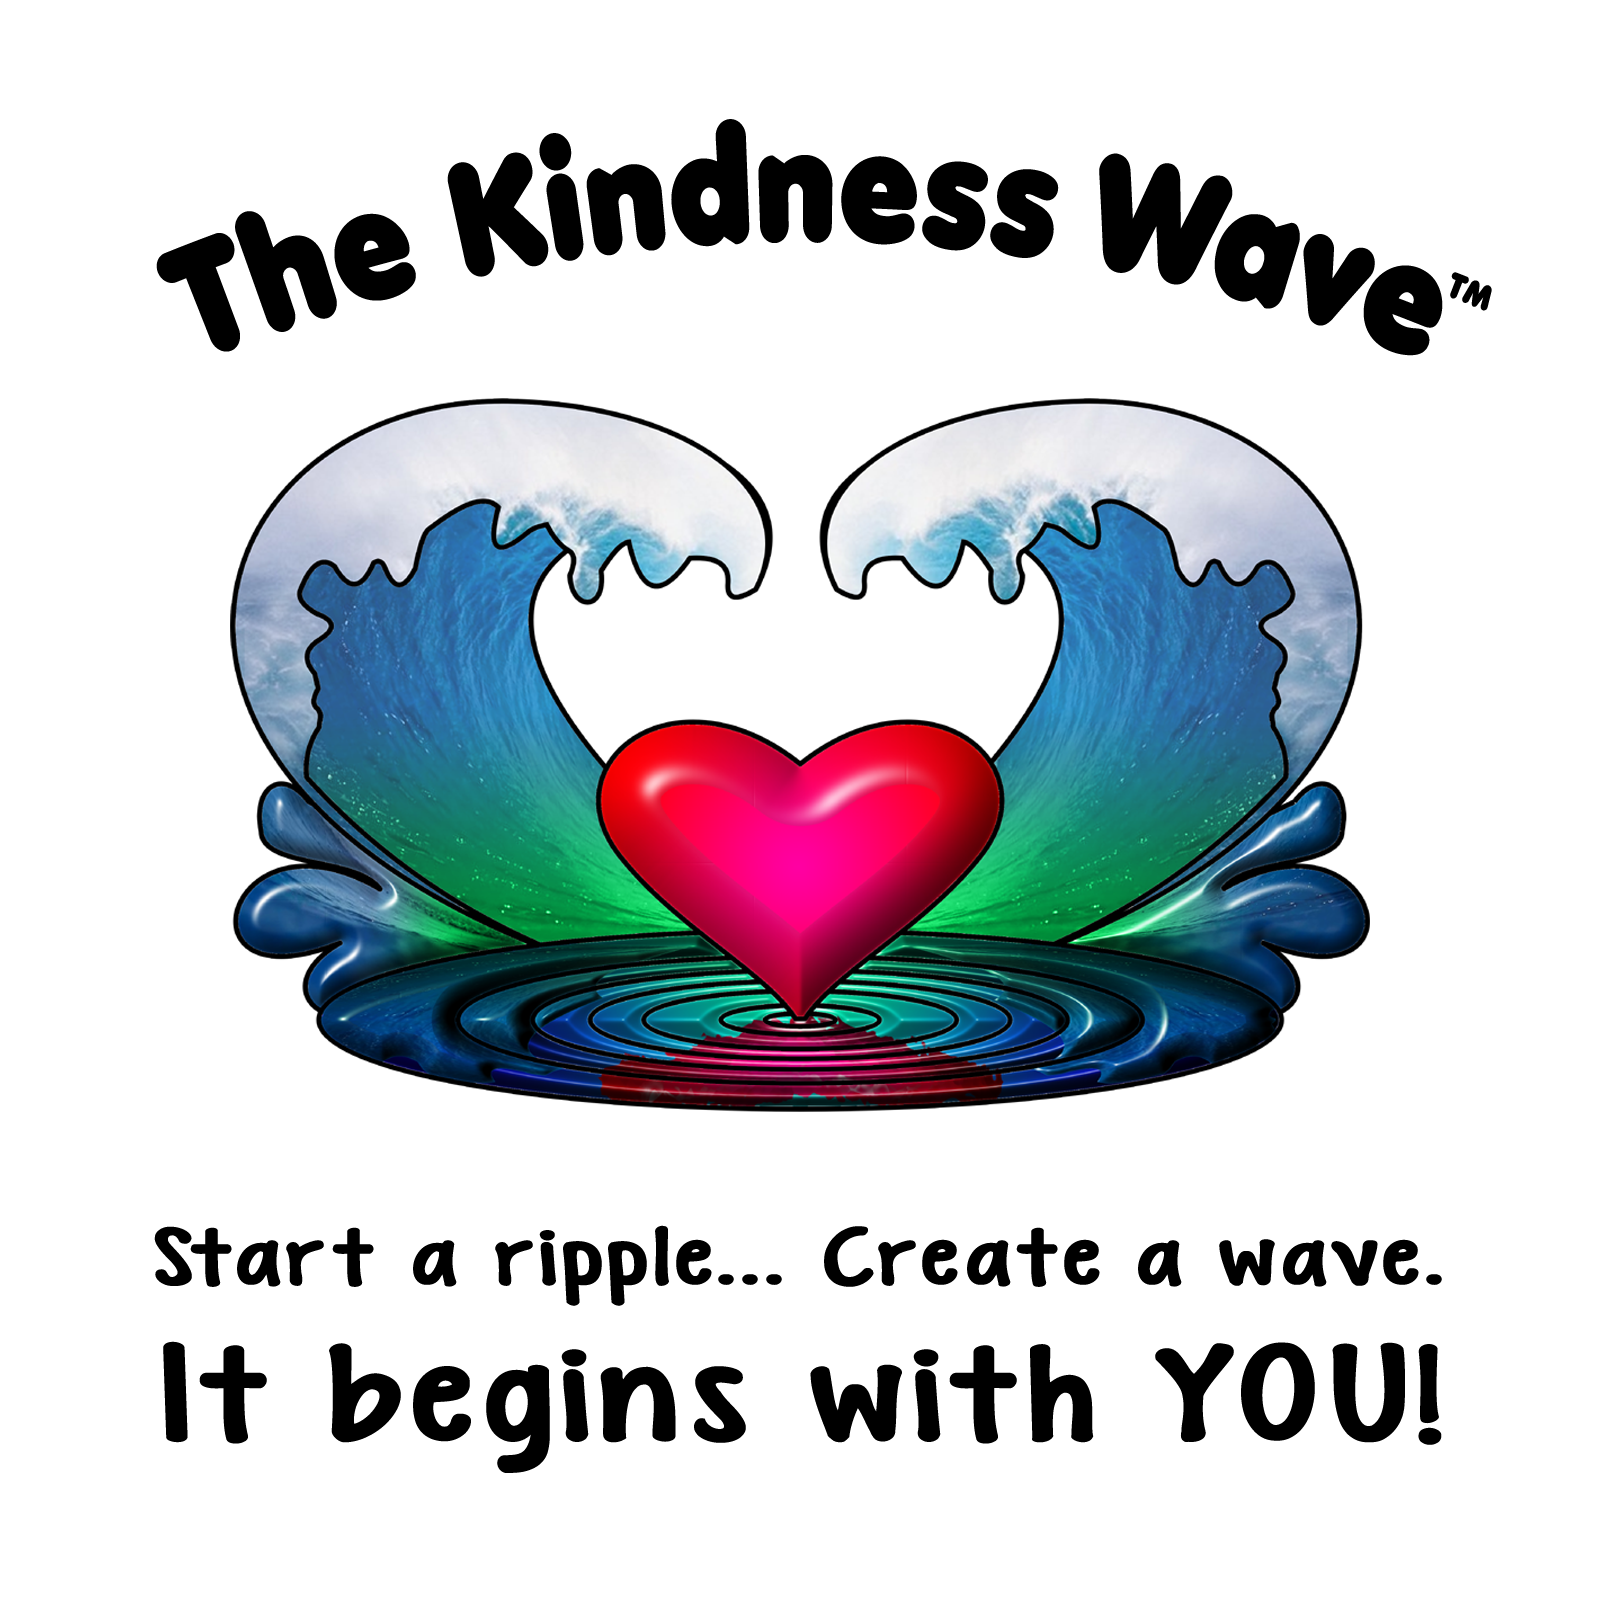 clipart of kindness - photo #11